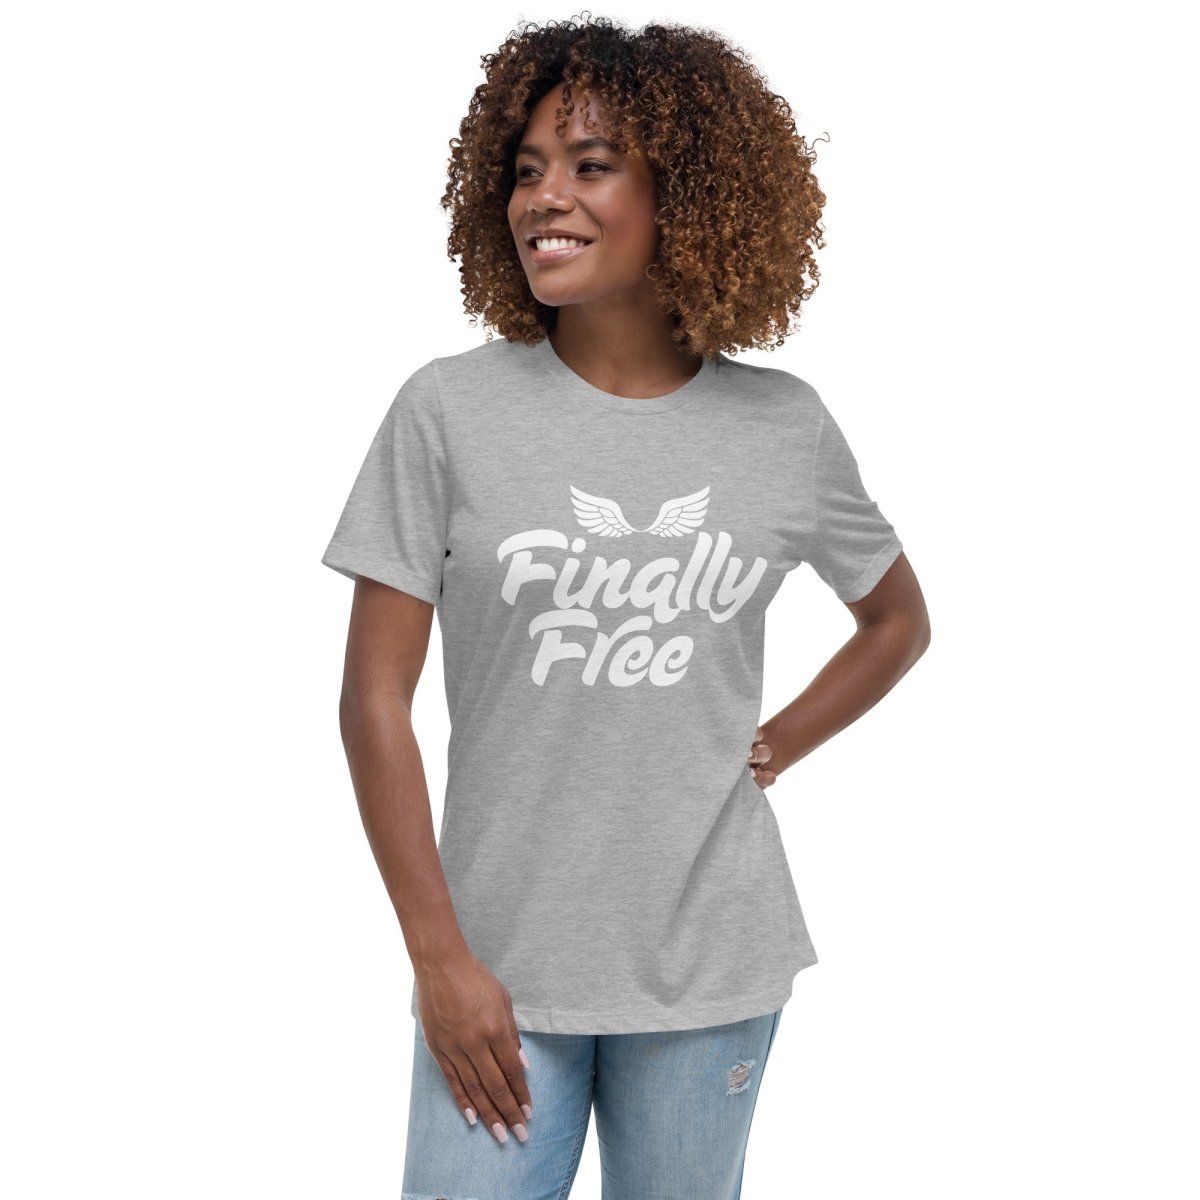 "Finally Free" Women's Relaxed Fit T-Shirt - Clean & Sober